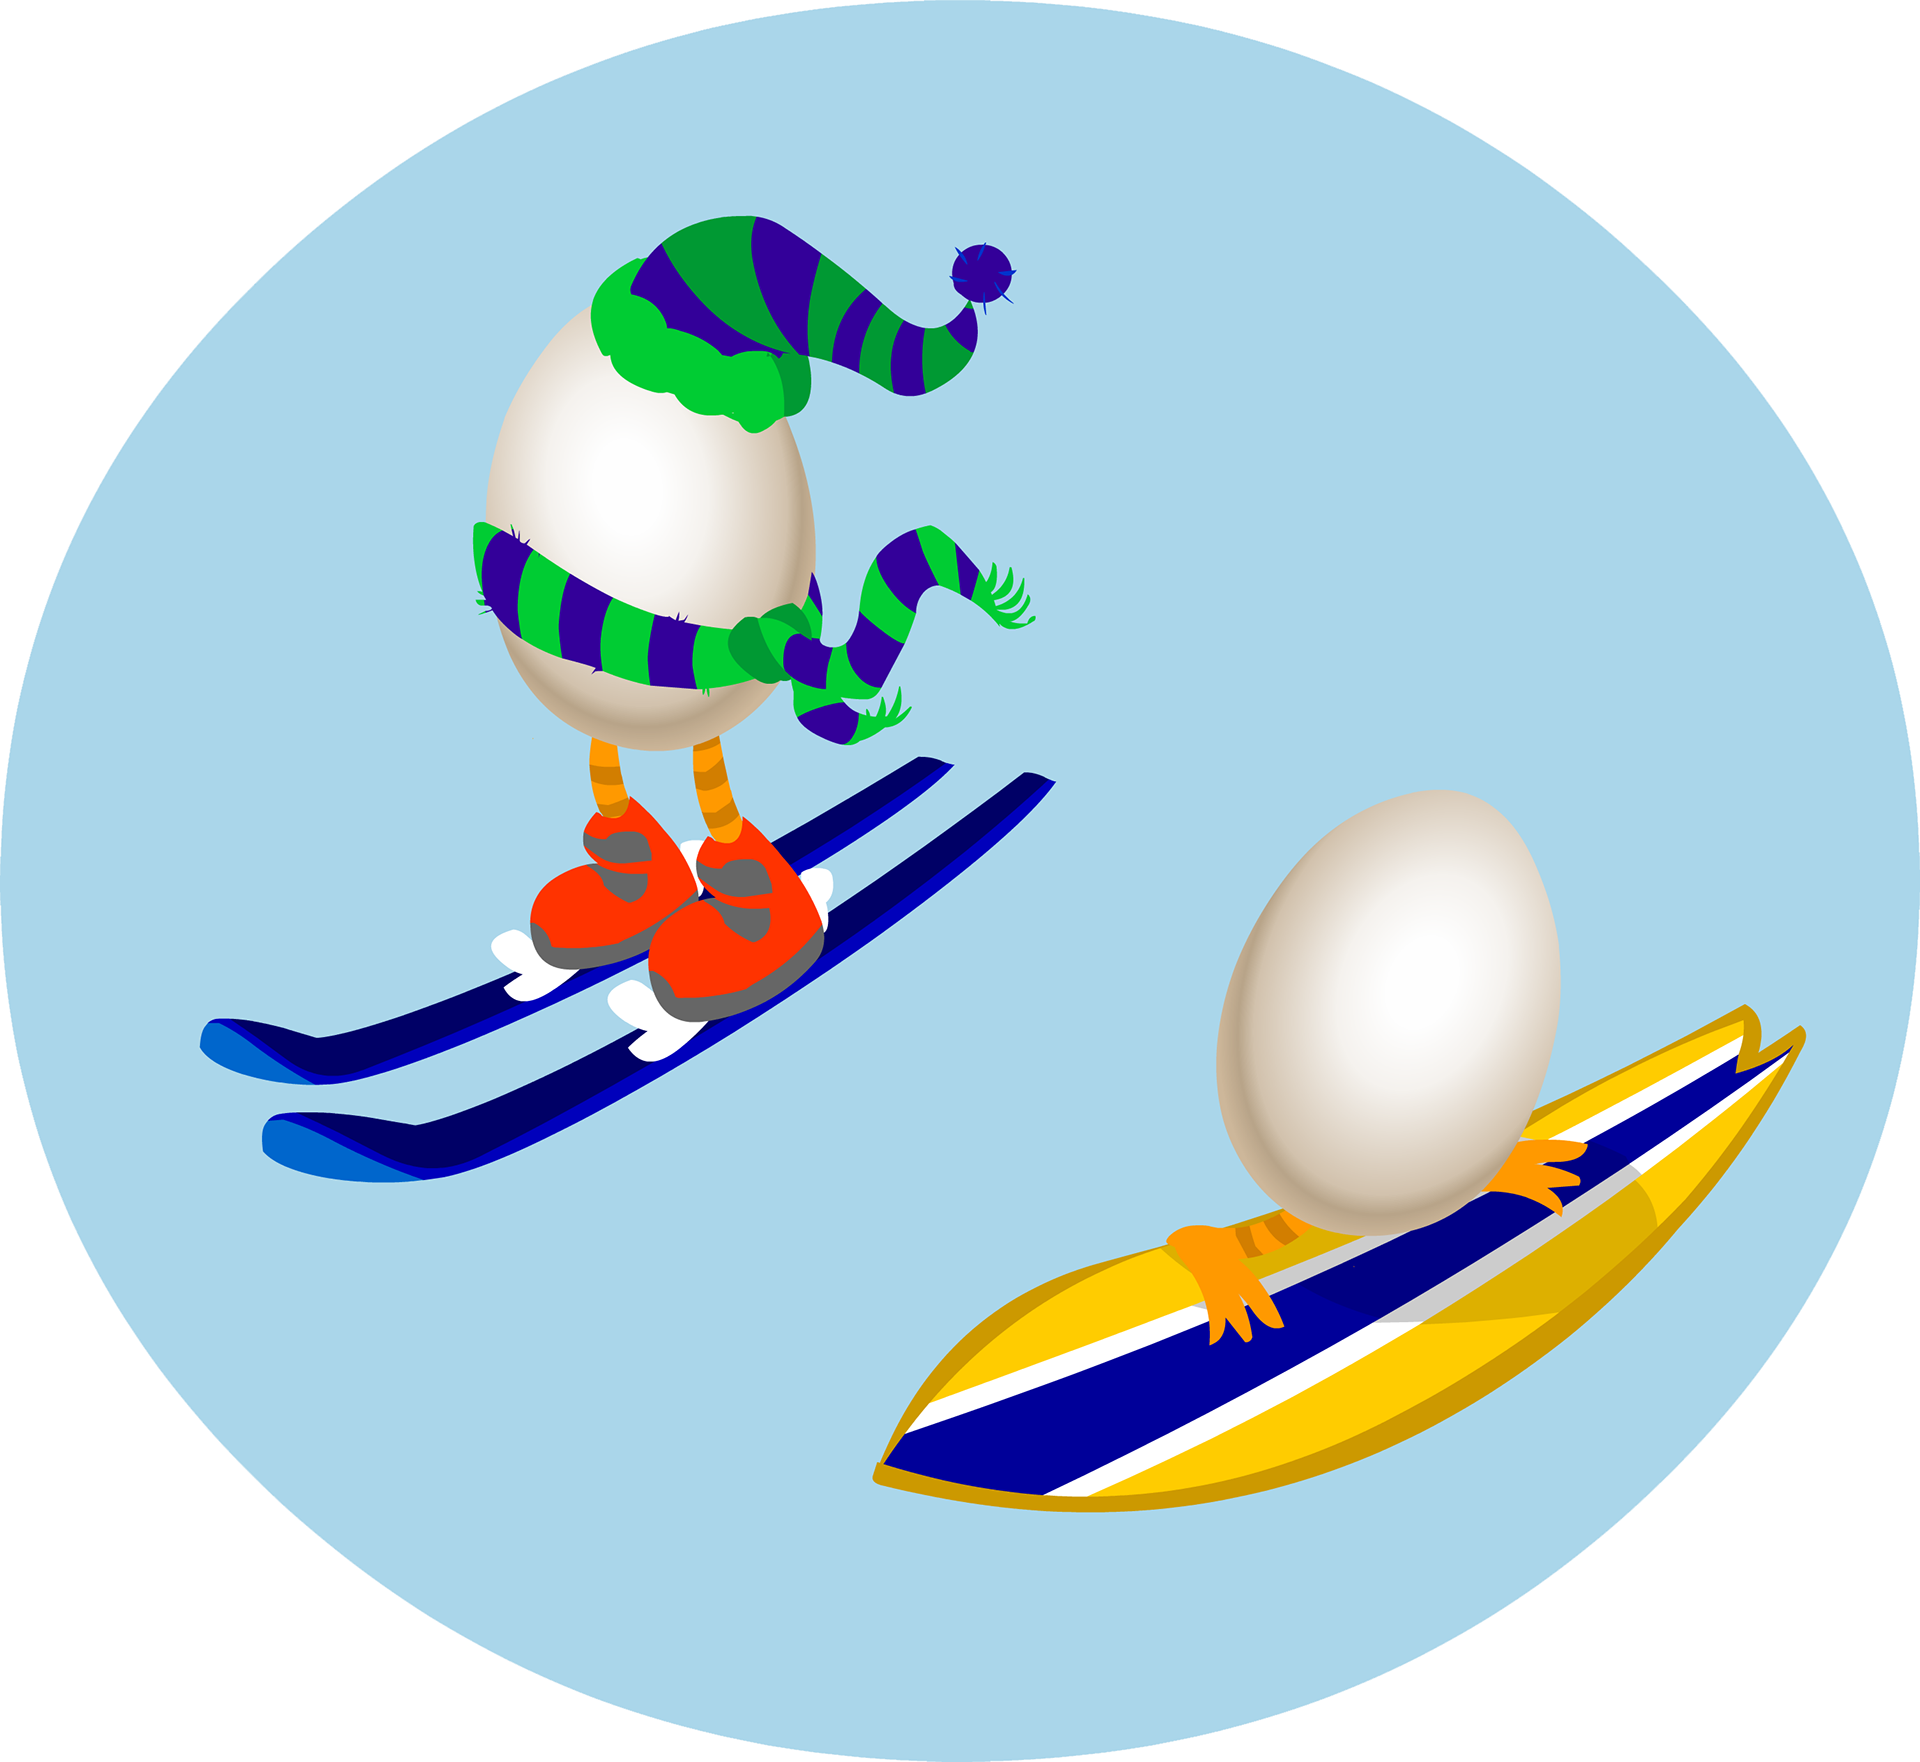 Eggs With Leggs Enjoying Both Winter And Summer Sports - Eggs With Leggs Enjoying Both Winter And Summer Sports (1920x1762)